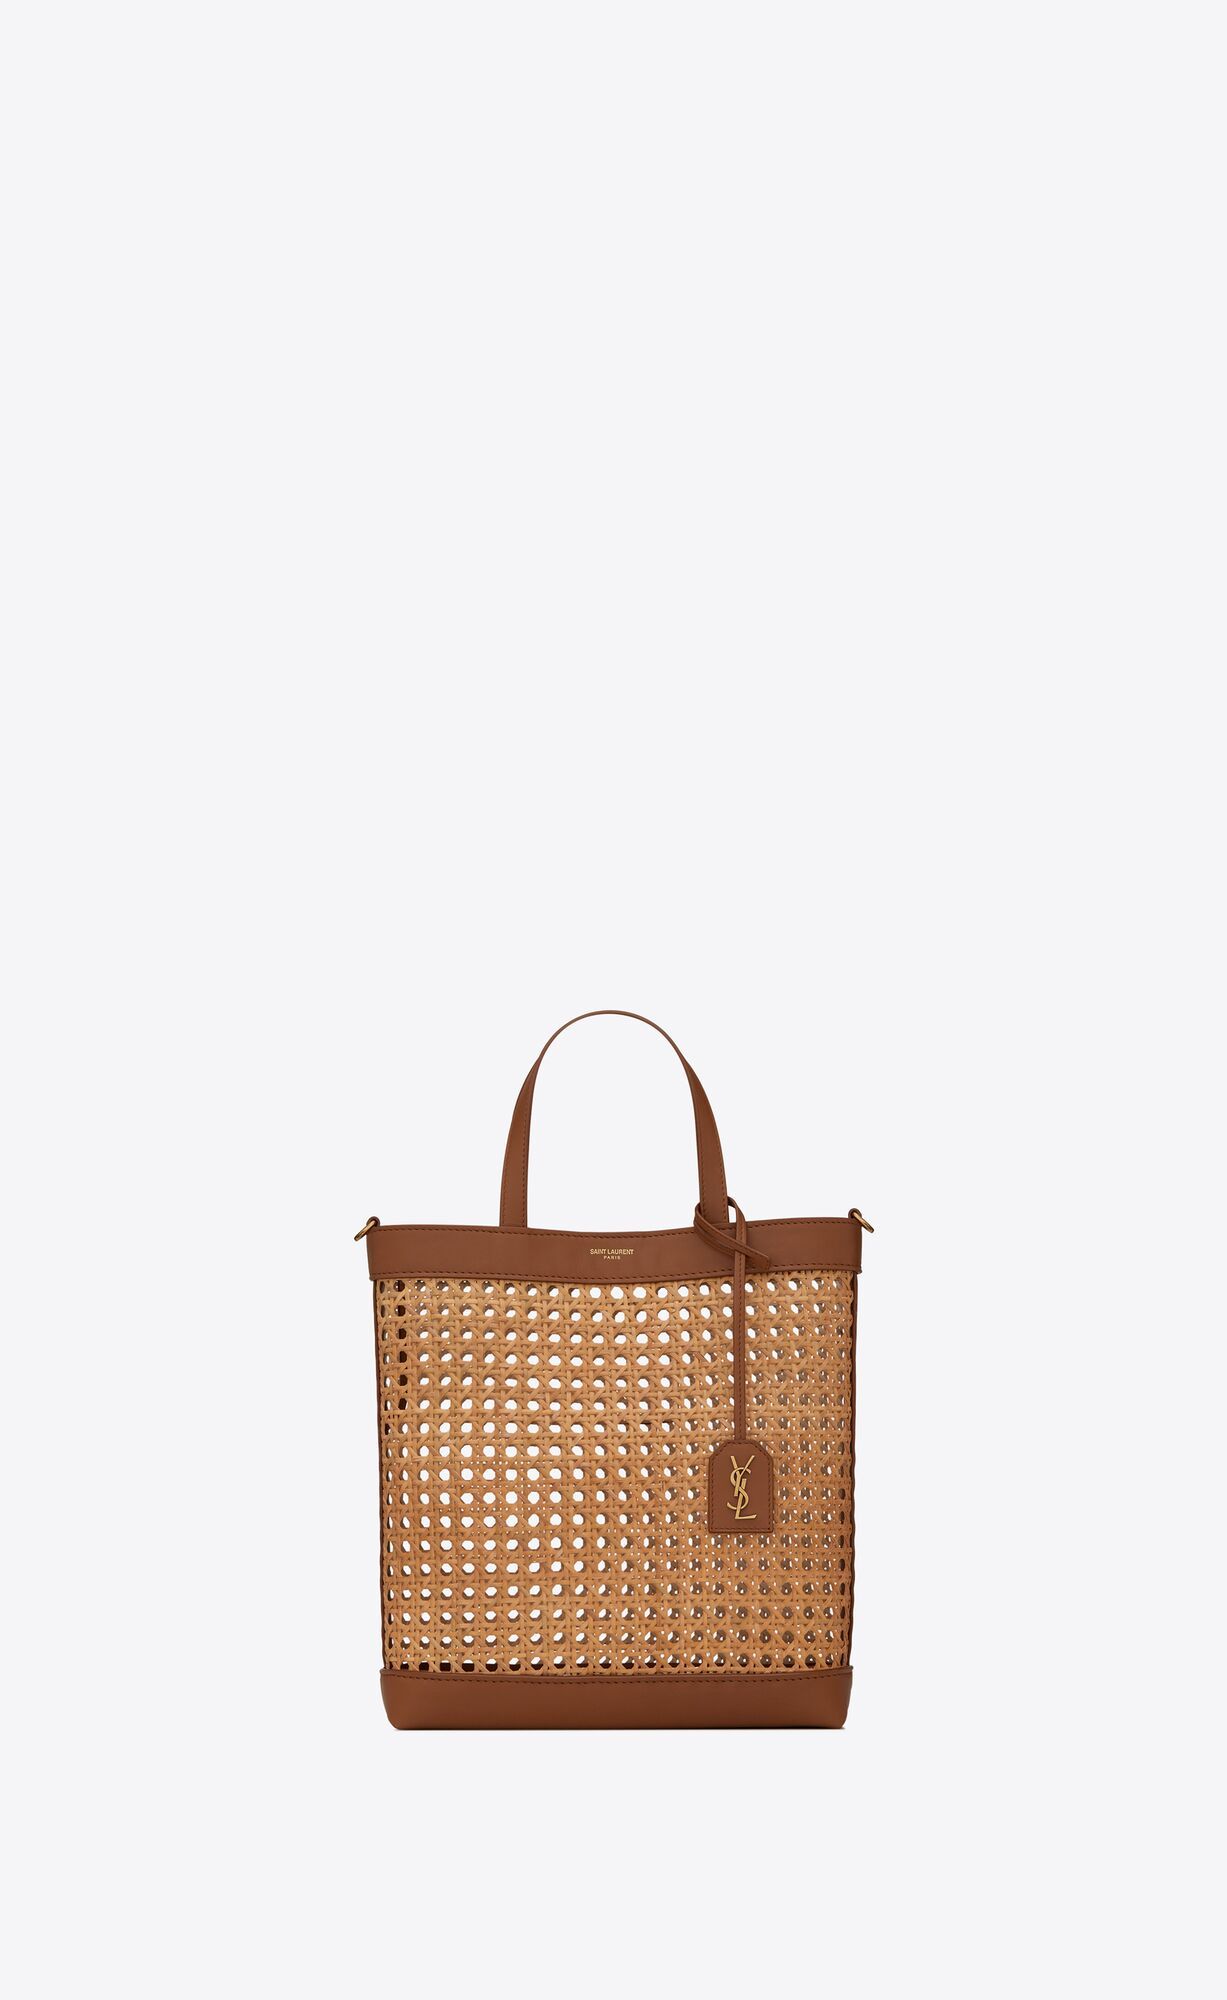 saint laurent n/s toy shopping bag in woven cane and leather | Saint Laurent Inc. (Global)